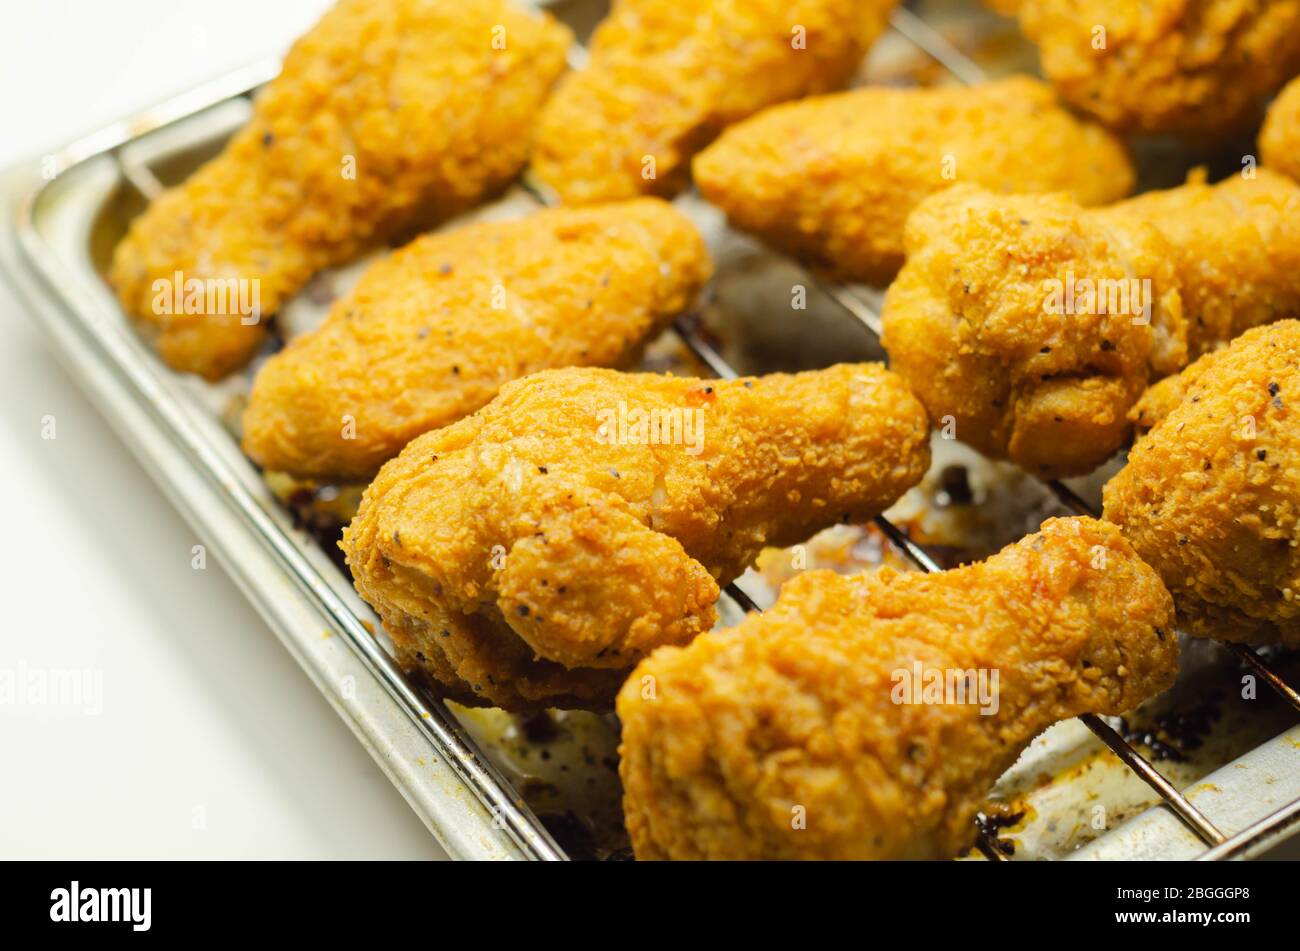 Southern Crispy Battered Fried Chicken Wings Deep Fried Chicken Wings On The Metal Tray Fast Food Stock Photo Alamy,Micro Irrigation Technician Jobs